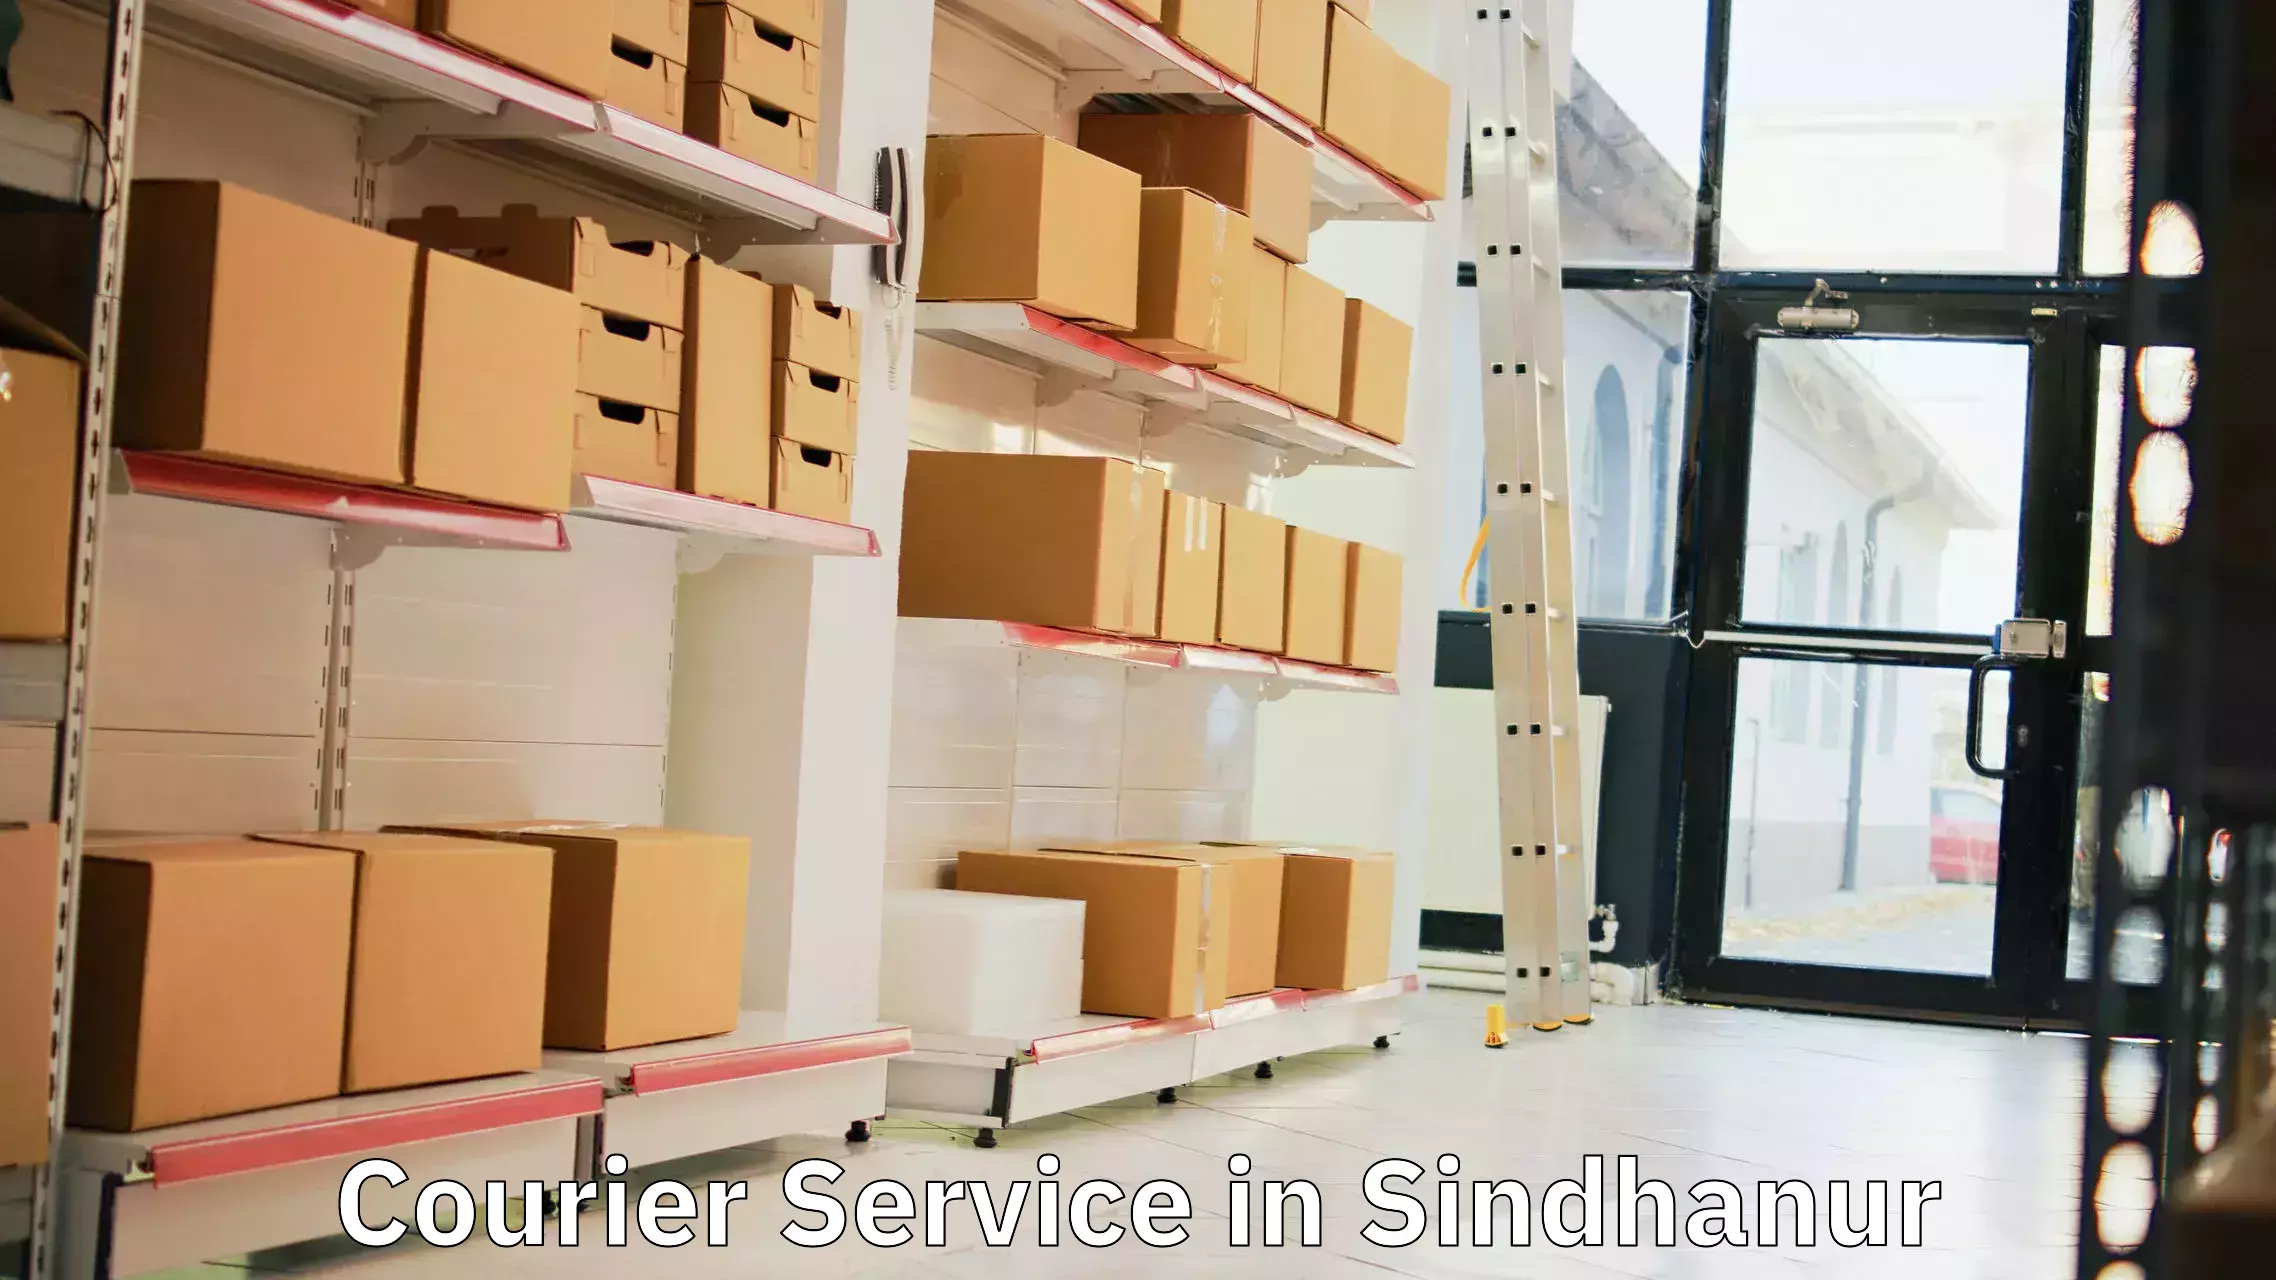 Professional delivery solutions in Sindhanur